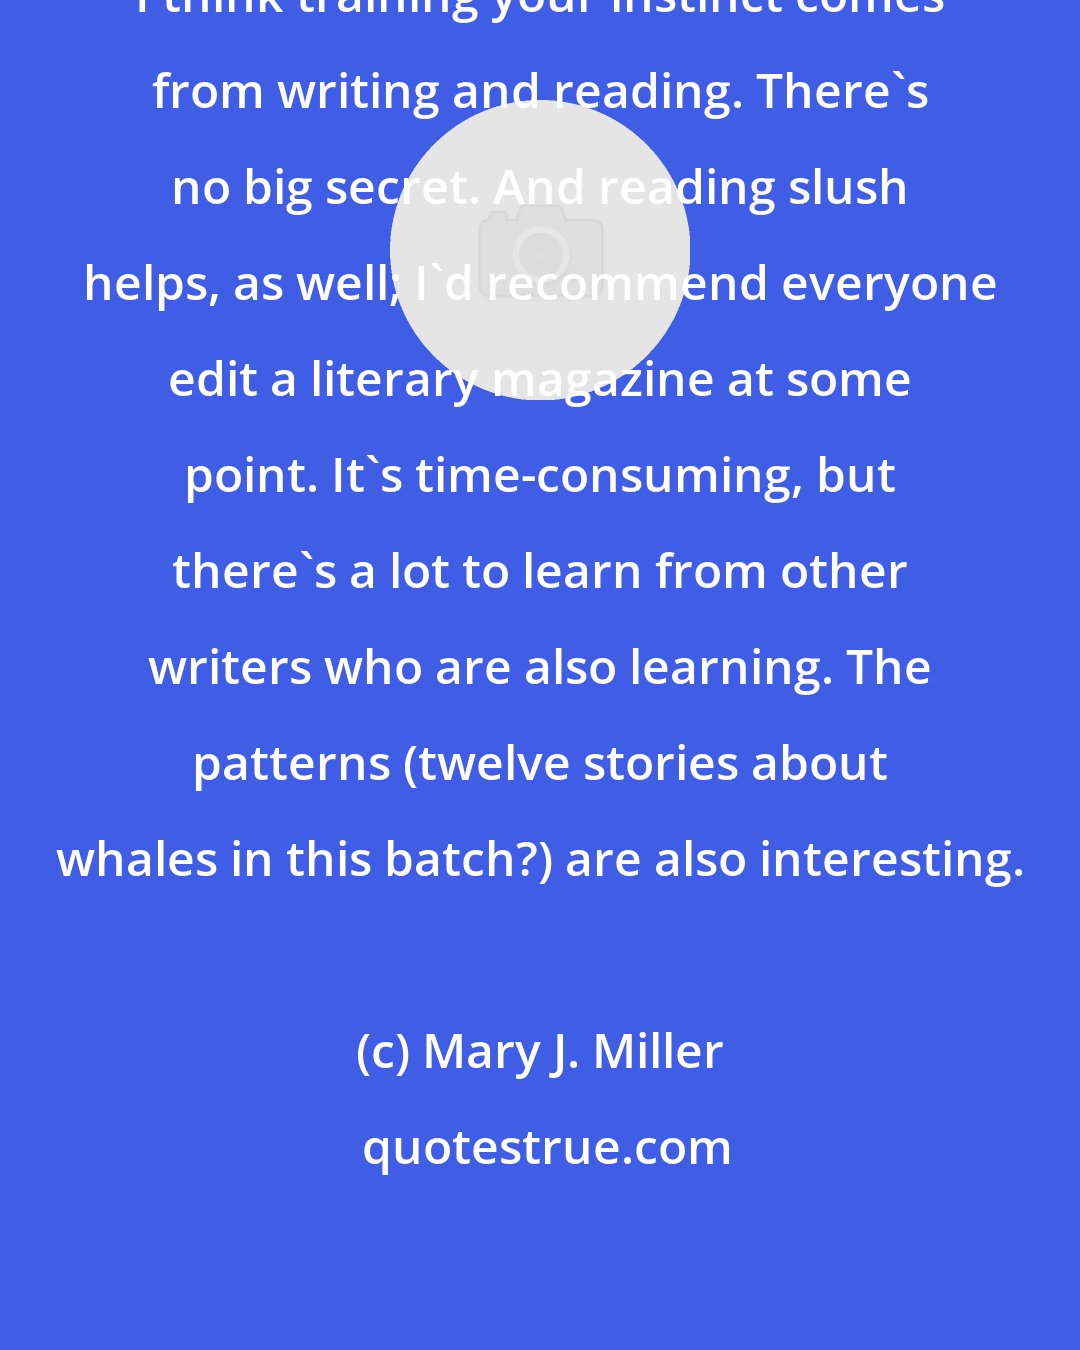 Mary J. Miller: I think training your instinct comes from writing and reading. There's no big secret. And reading slush helps, as well; I'd recommend everyone edit a literary magazine at some point. It's time-consuming, but there's a lot to learn from other writers who are also learning. The patterns (twelve stories about whales in this batch?) are also interesting.